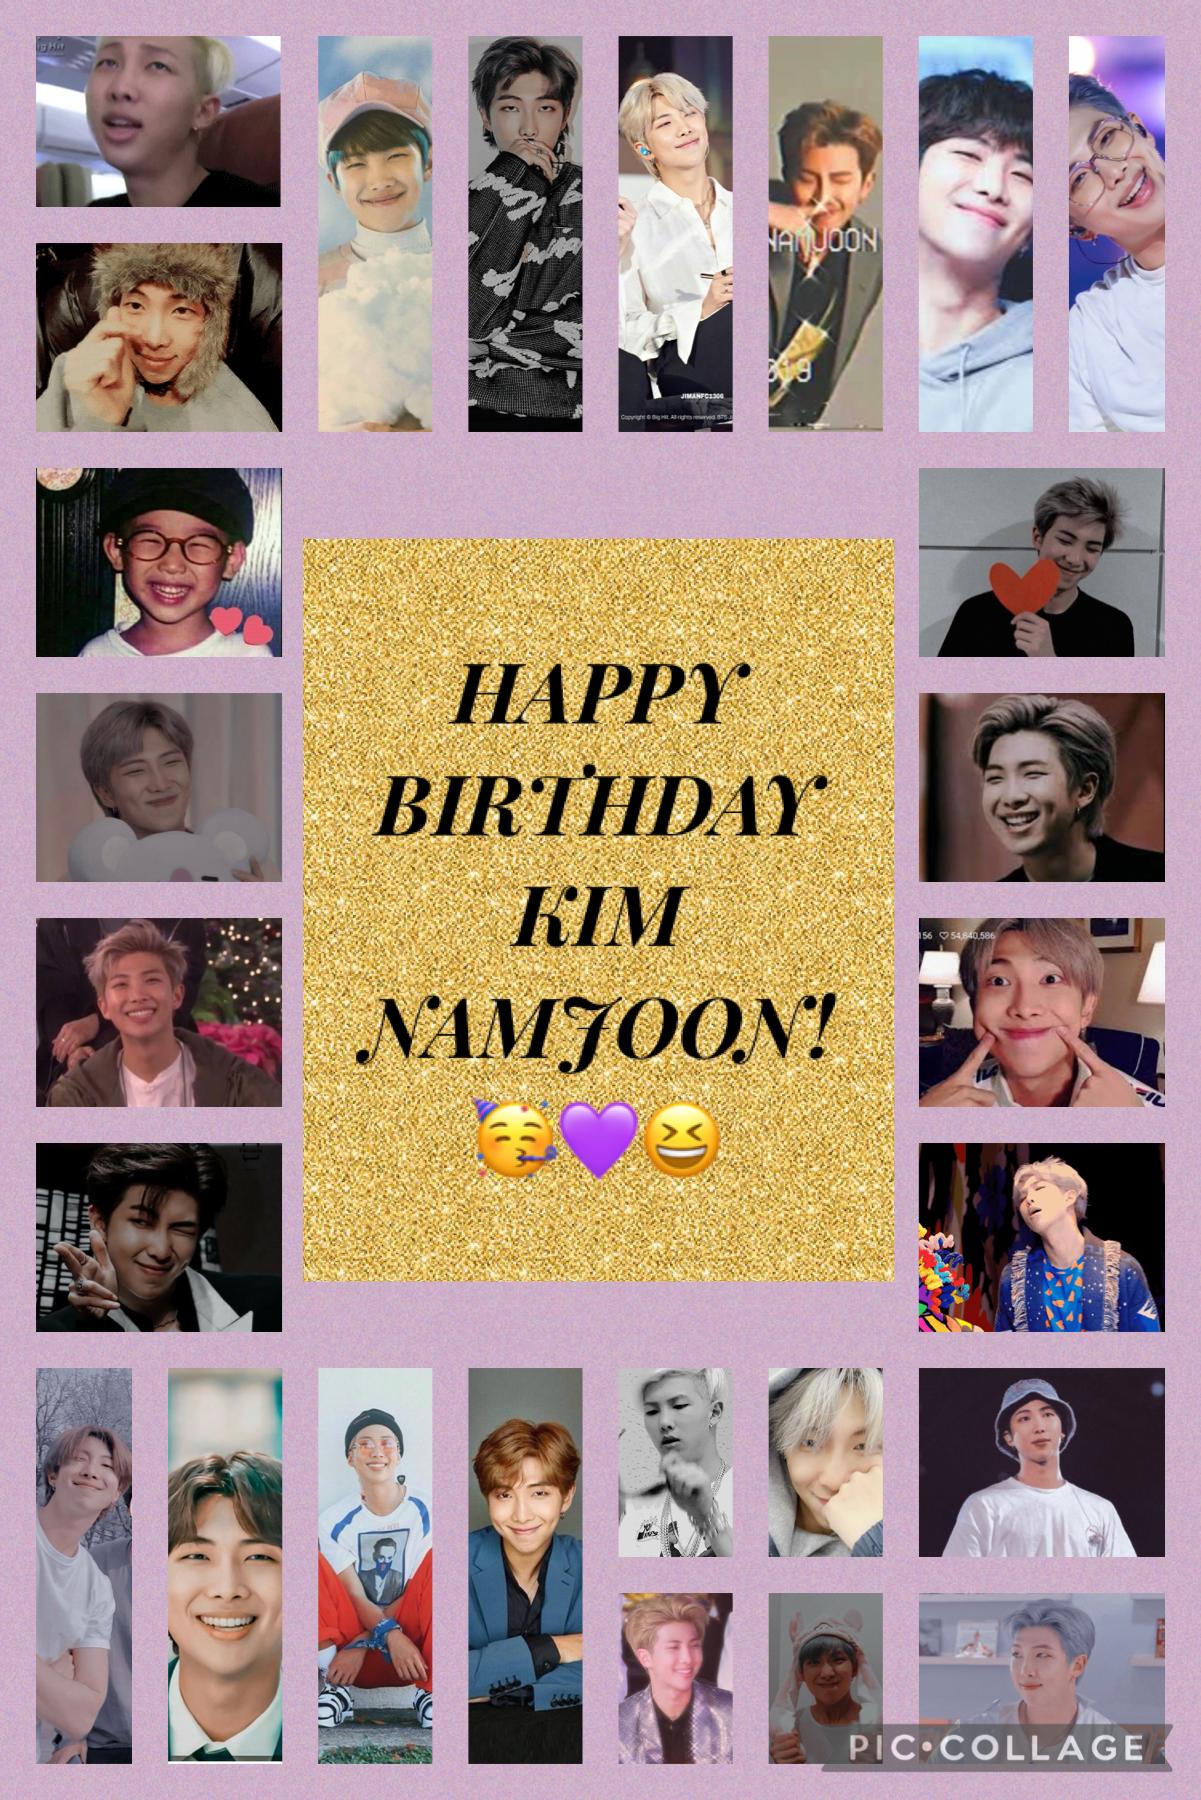 Happy birthday to our wonderful leader, Kim Namjoon!!! 💜Going on a strong 8 years with his amazing BTS family✊ 사랑해😘💜💜